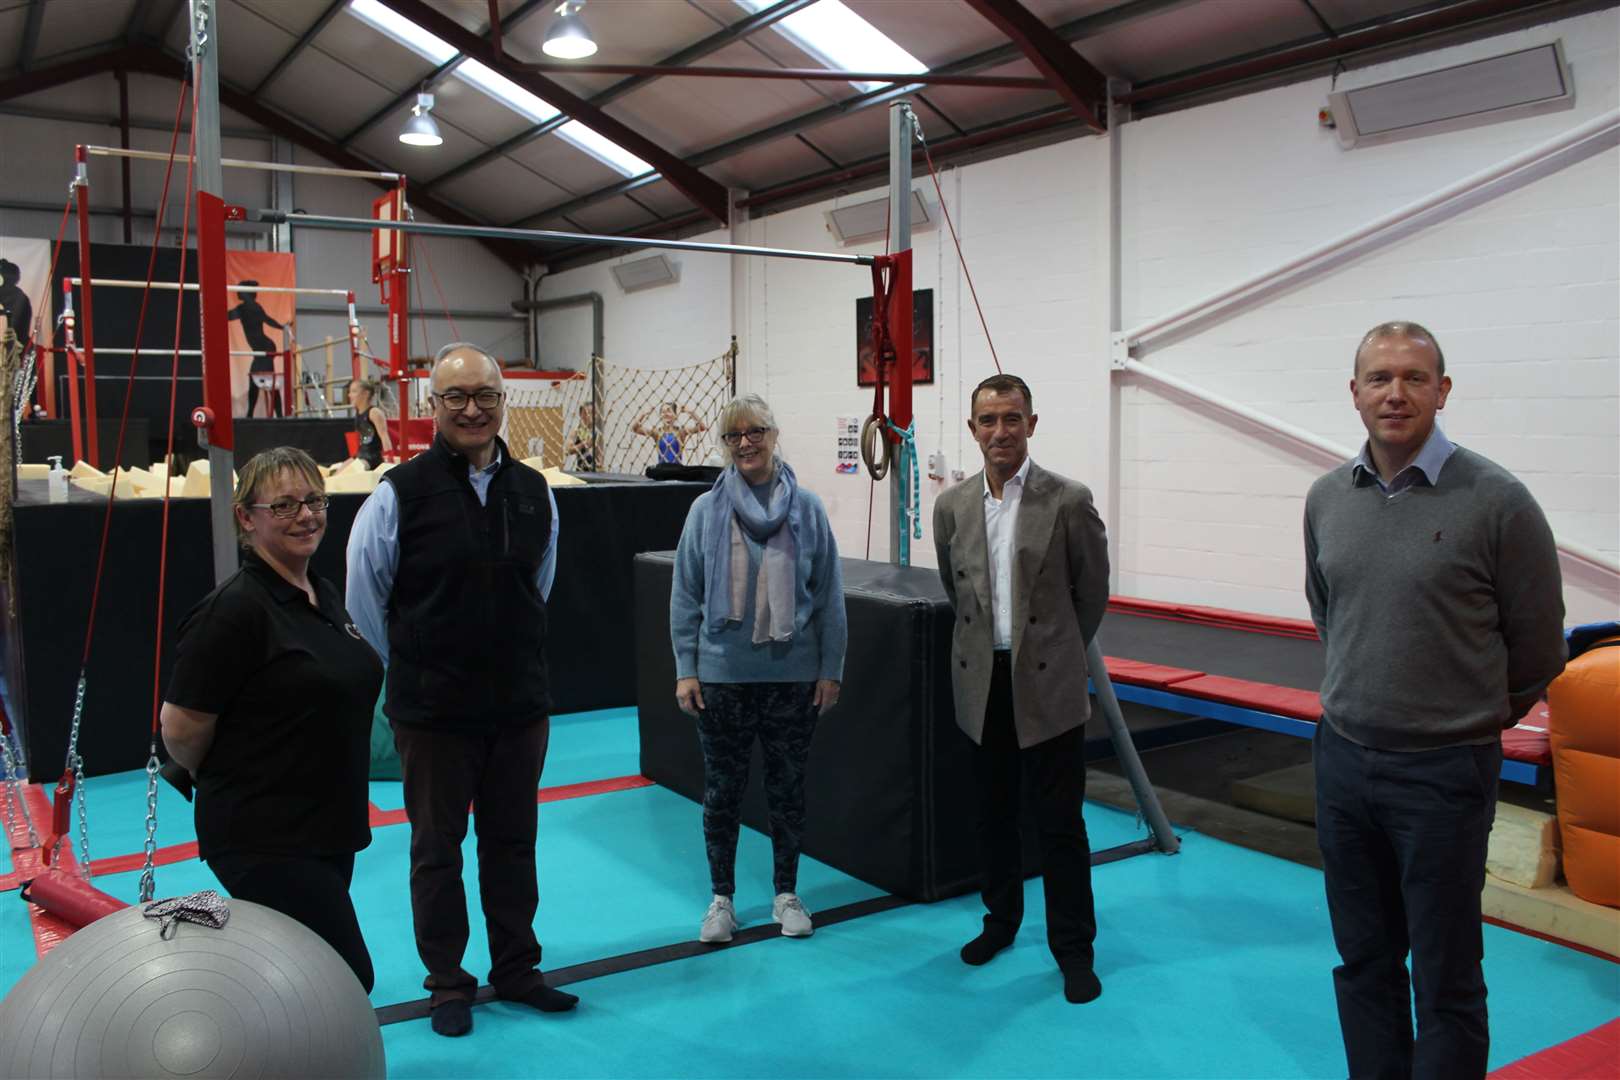 At Garioch Gymnastics Club's new facility are (from left): club manager Janine Robertson; chairman of the trustees Gary Tolometti; head coach Trish Swan; chairman of the board of Scottish Gymnastics Brian Ewing and Scottish Gymnastics CEO Doc McKelvey.